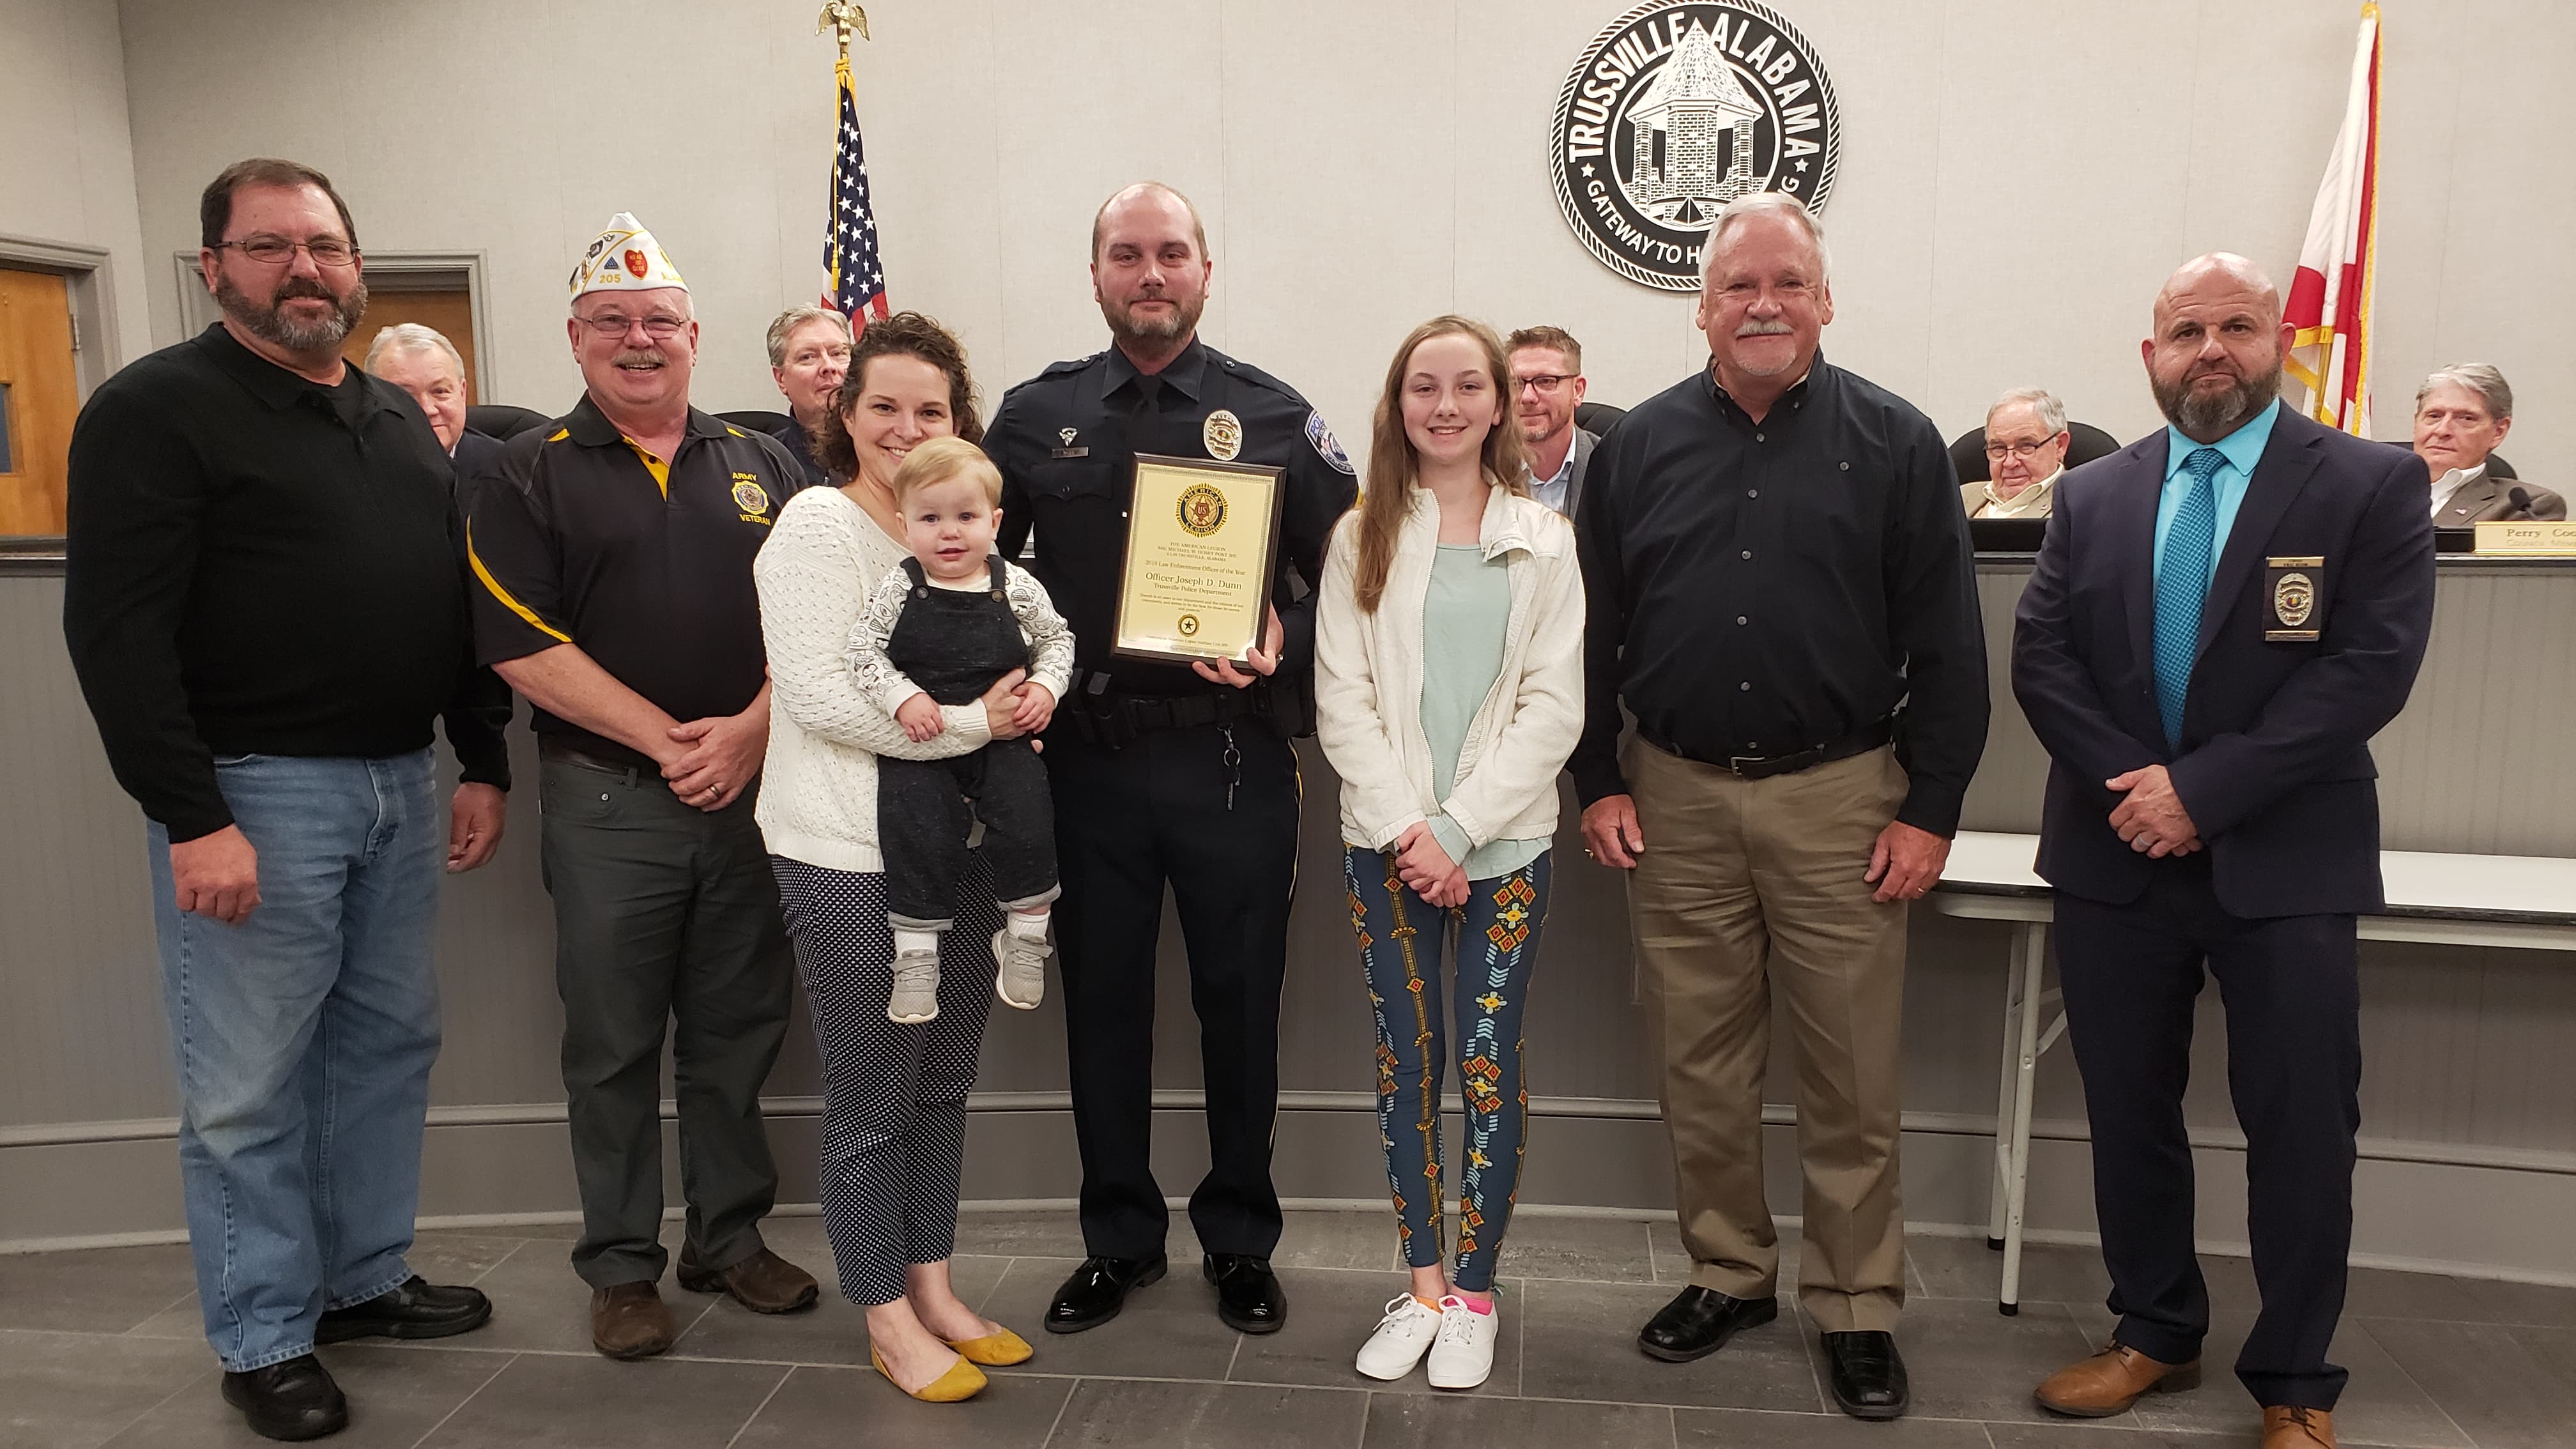 Trussville Police Officer named 'Law Enforcement Officer of the Year' at city council meeting